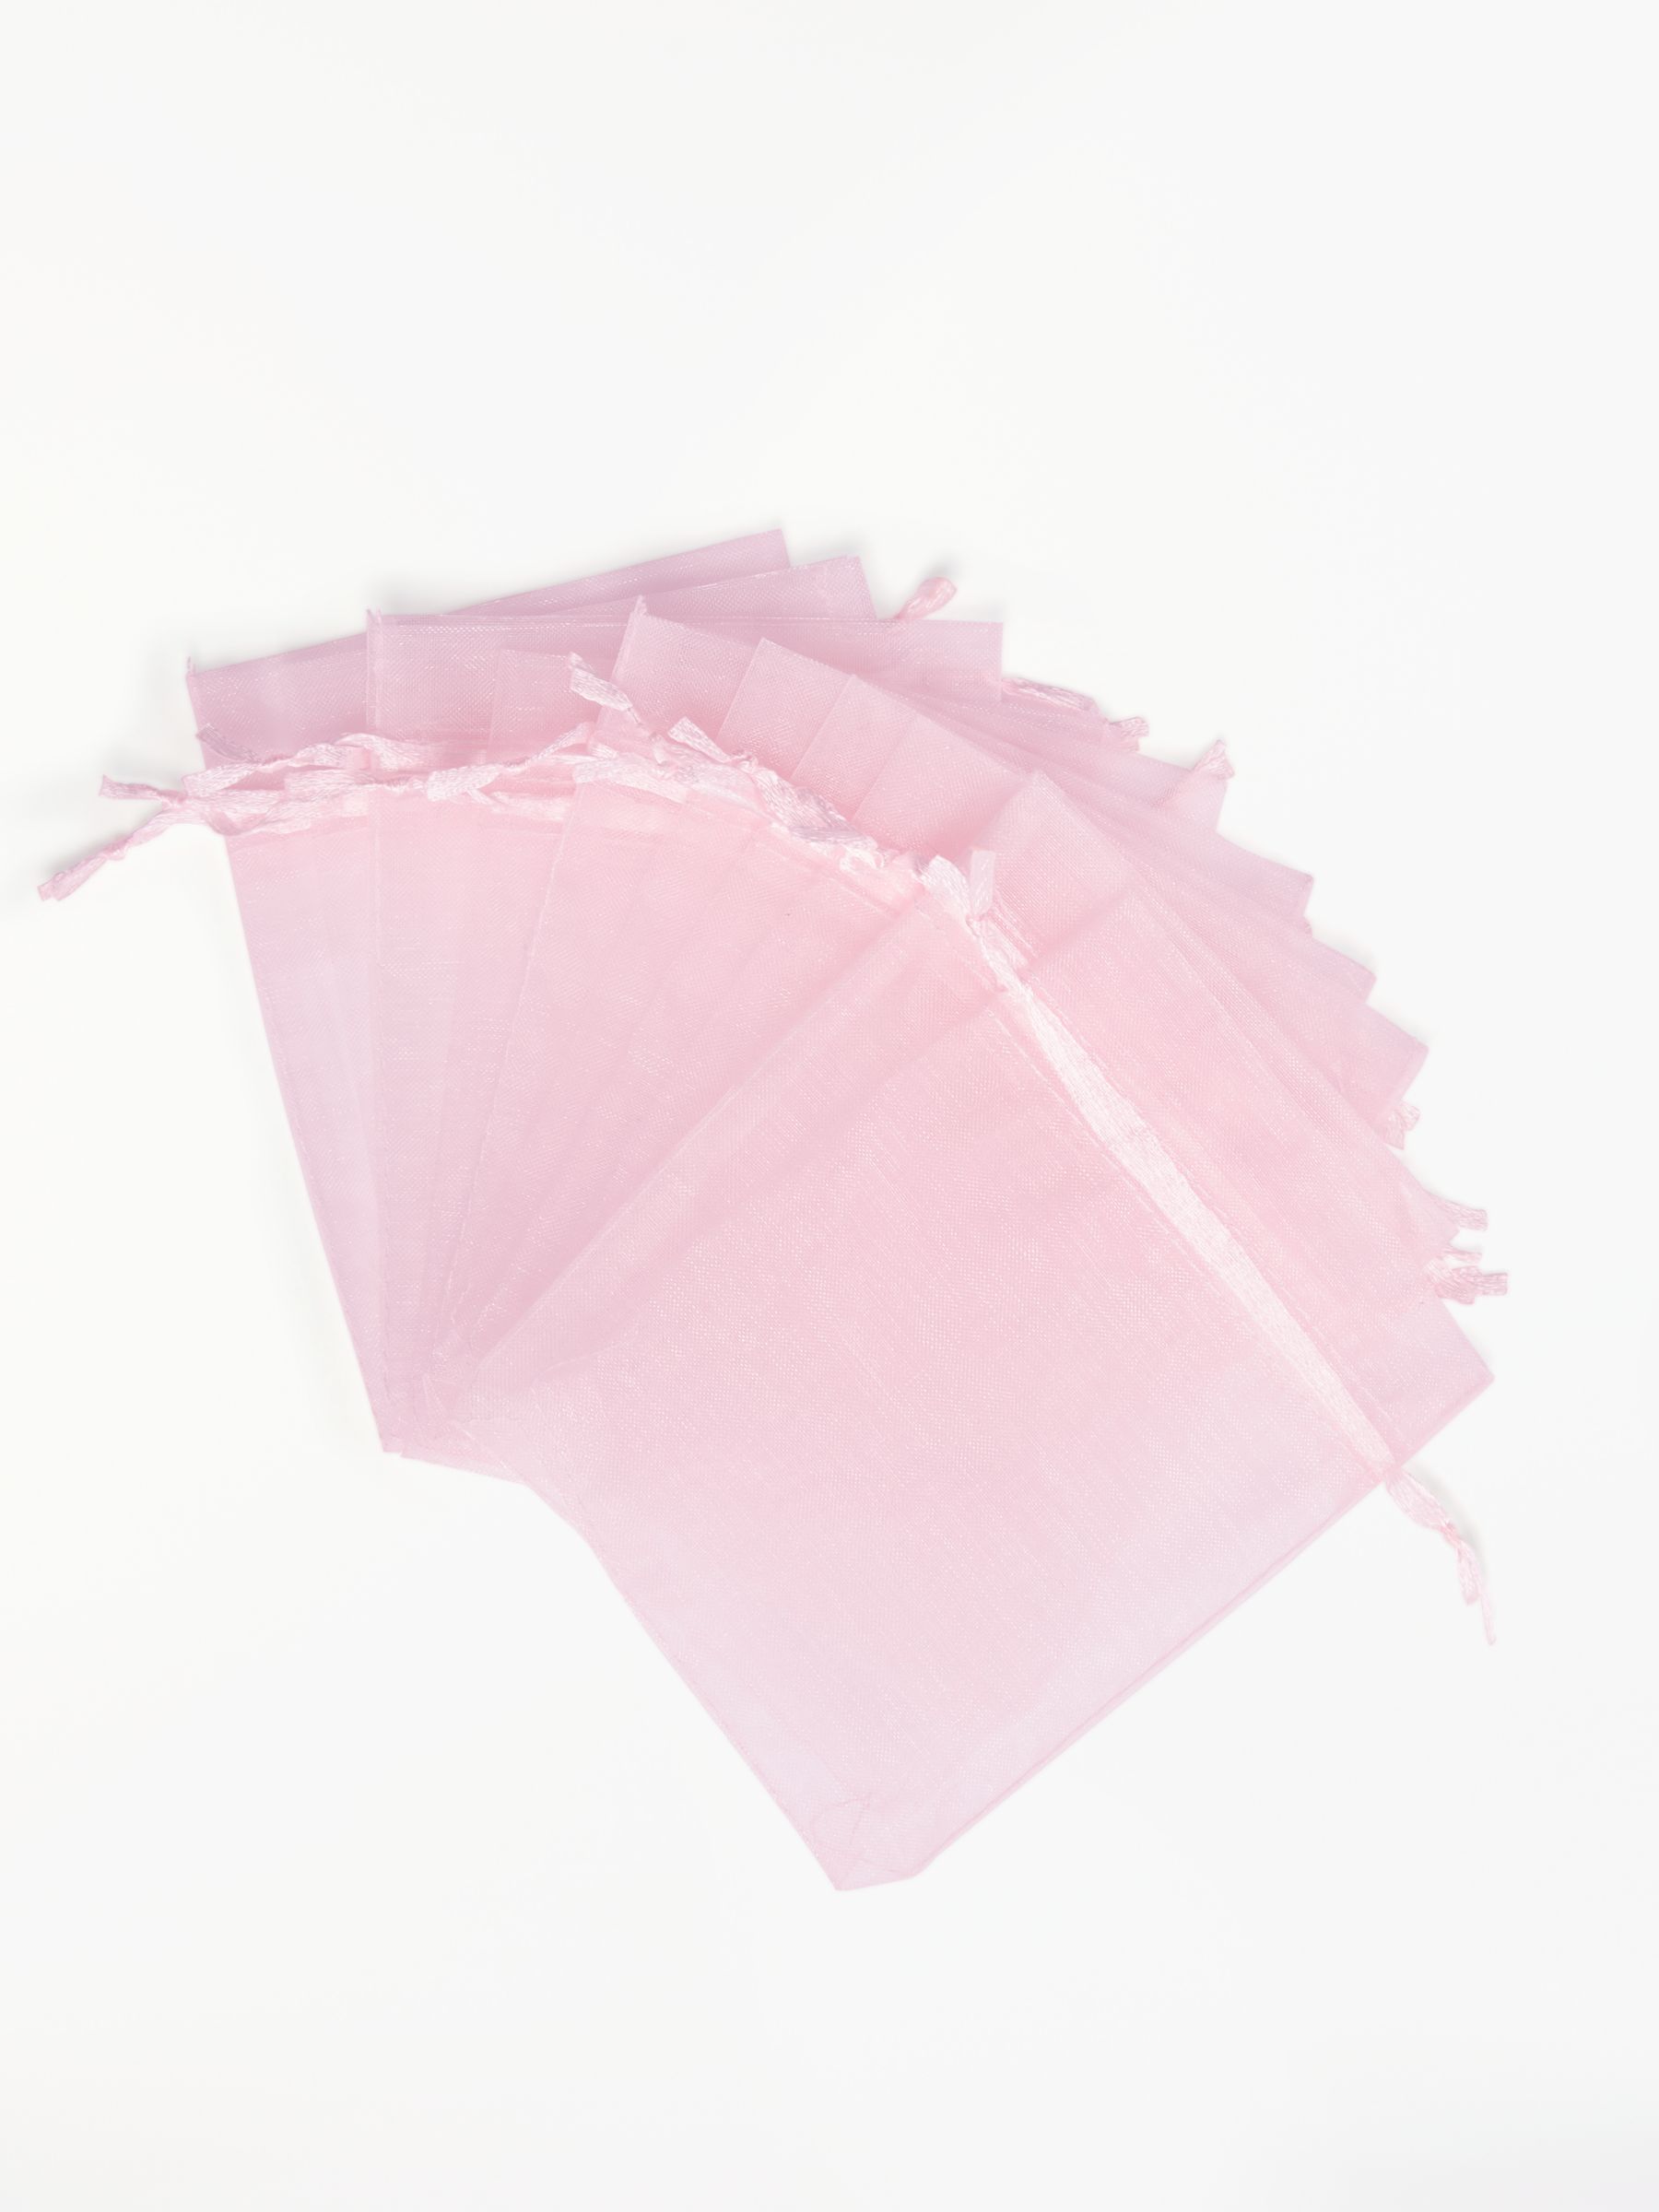 Habico Organza Bags, Pack of 10, Pink